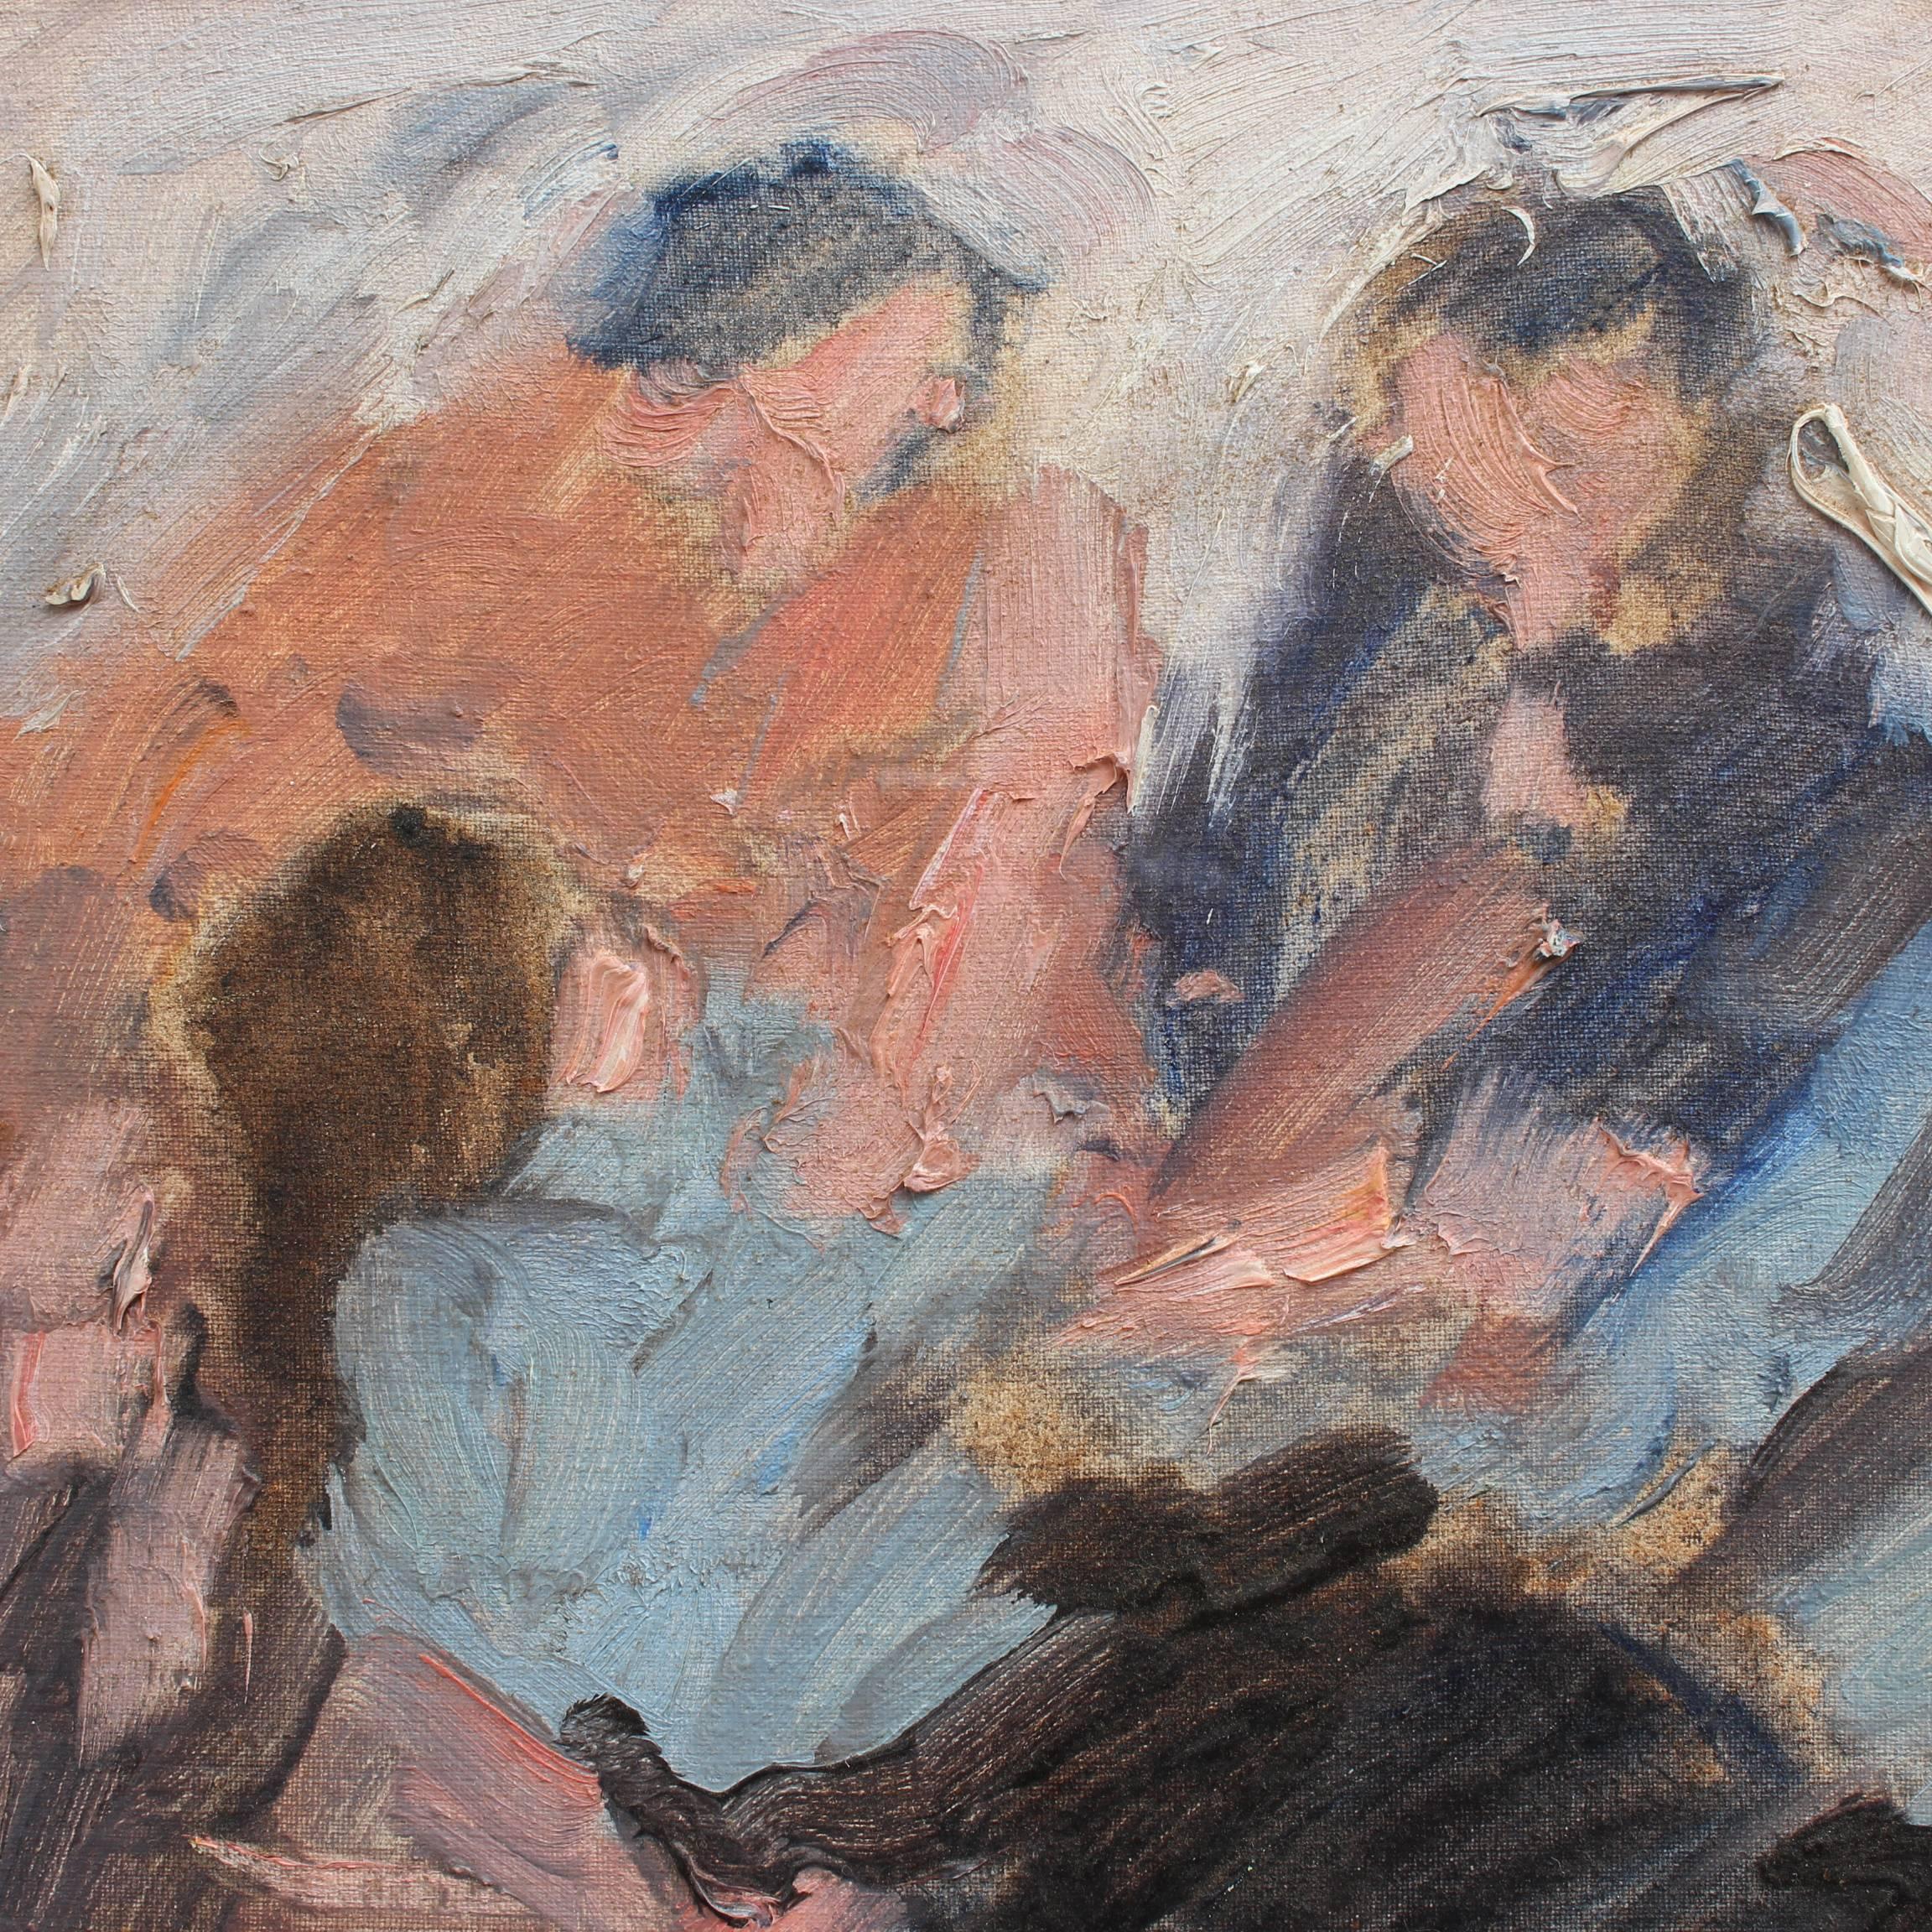 'The Birth' oil on board, by Italian artist G. Ciacci (1965). This image seems to depict the birth of Jesus. Two figures stand over the new mother with holy baby in this expressionist painting. There are bold, painterly strokes in blues, white,